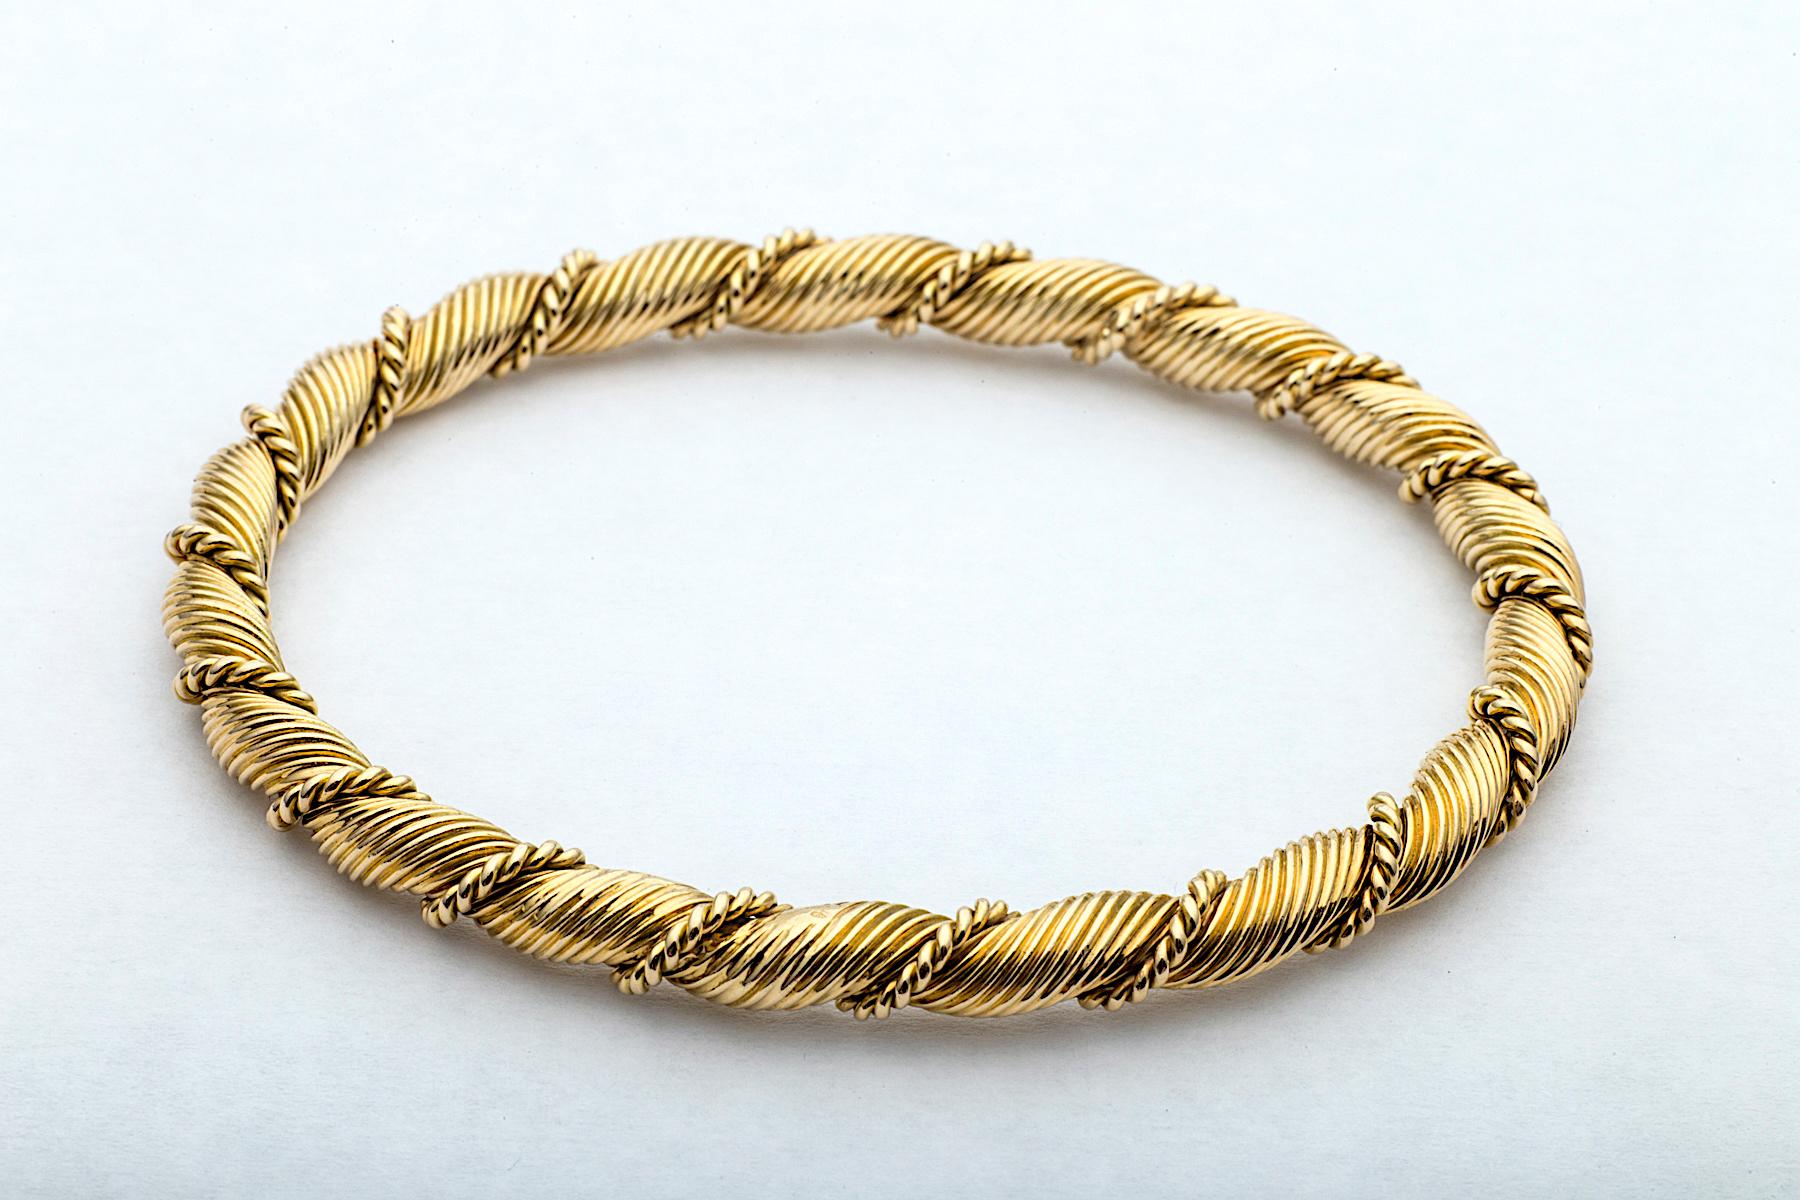 You'll hit triple gold when wearing these three vintage Van Cleef & Arpels Paris 18 karat yellow gold bangle bracelets.  Created in the 1970's, with an iconic twisted rope design, these collectible bangles move with a bespoke elegance.  Stamped